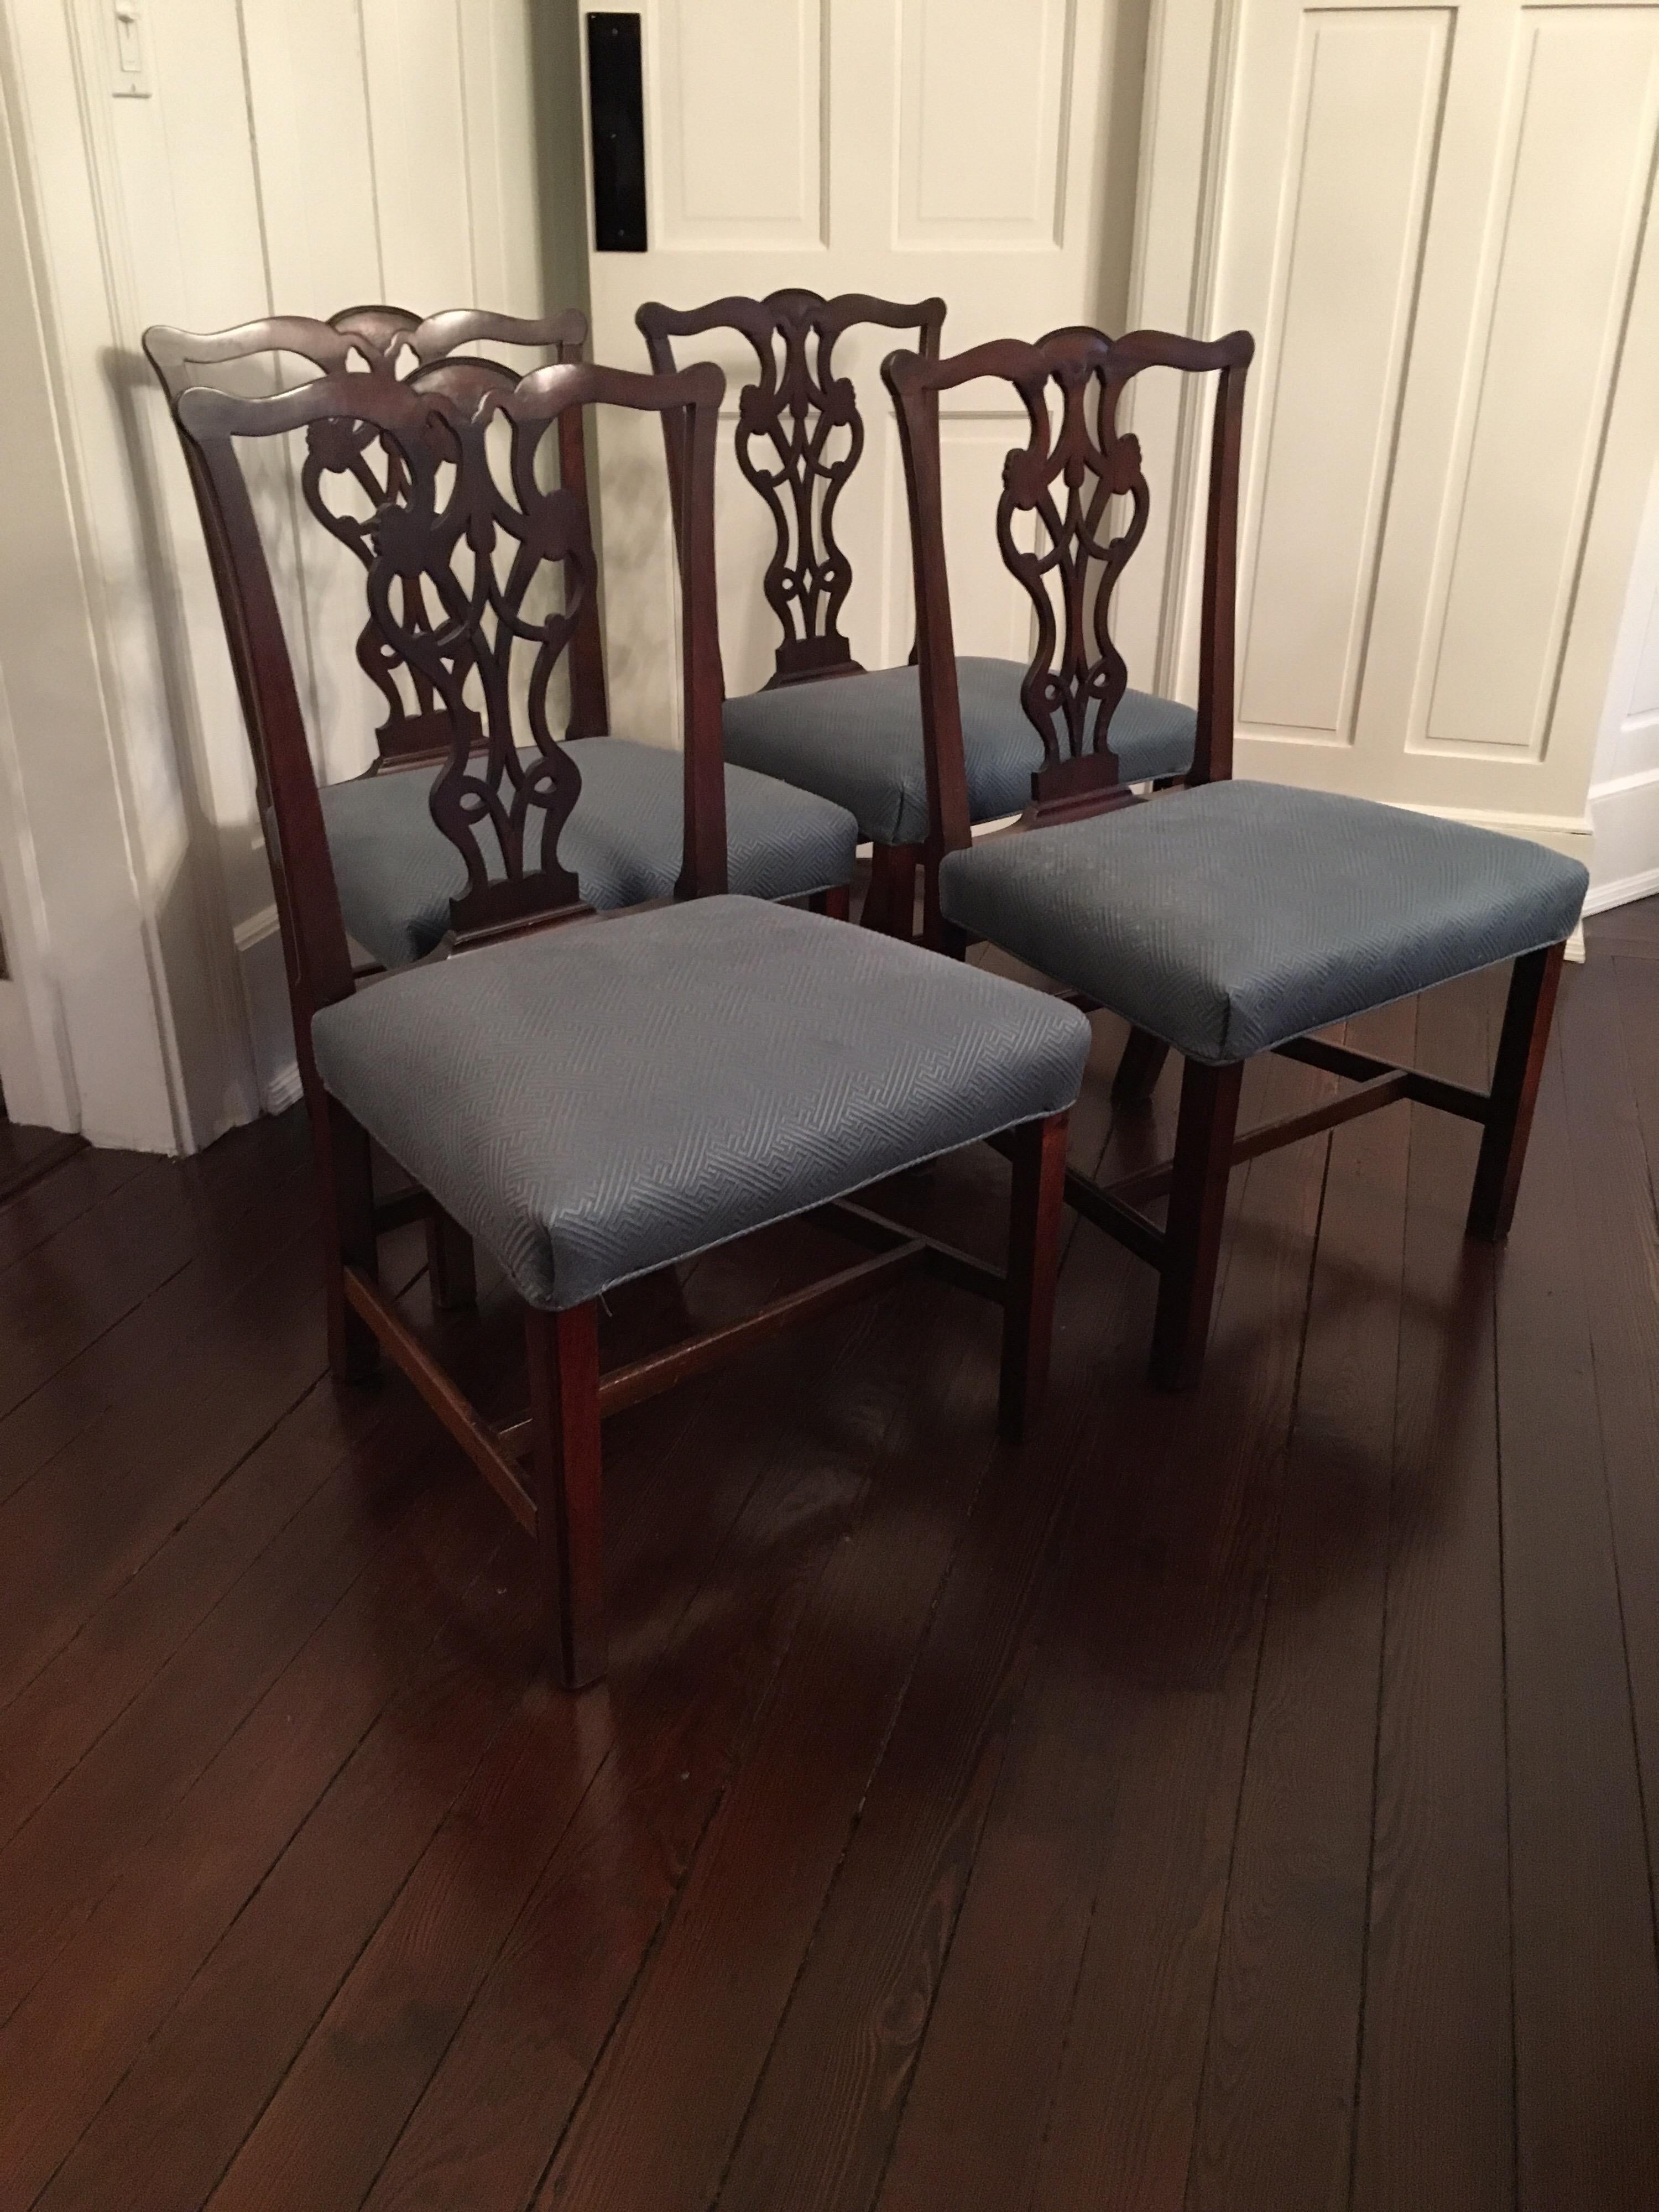 Set of four early 20th century Chippendale style side chairs - upholstered in blue Greek key fabric.